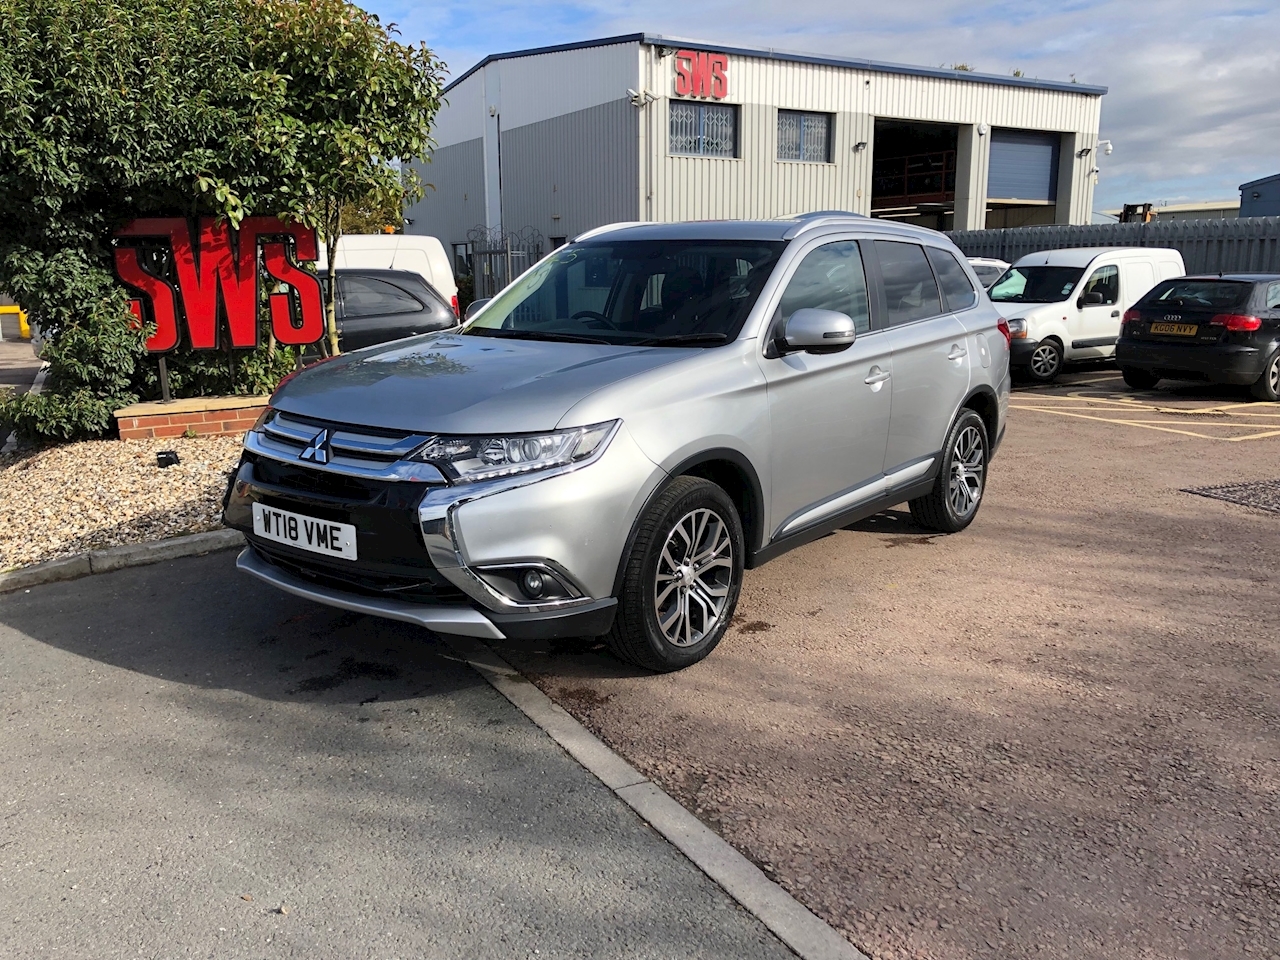 Mitsubishi Outlander DiD 3 2.3 5dr Cat S Automatic Diesel